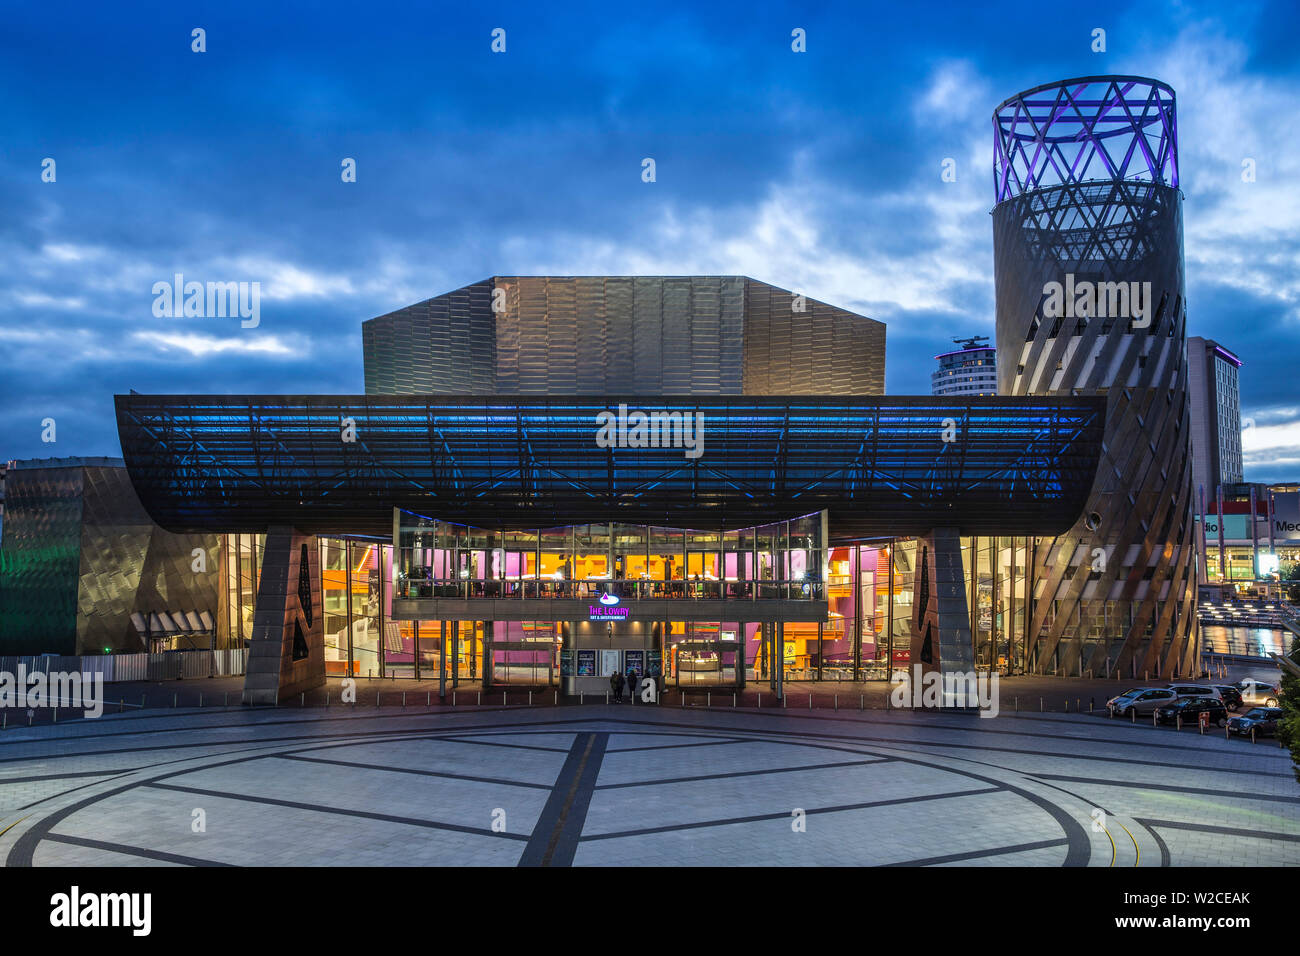 United Kingdom, England, Greater Manchester, Manchester, Salford, The Lowry Theatre Stock Photo